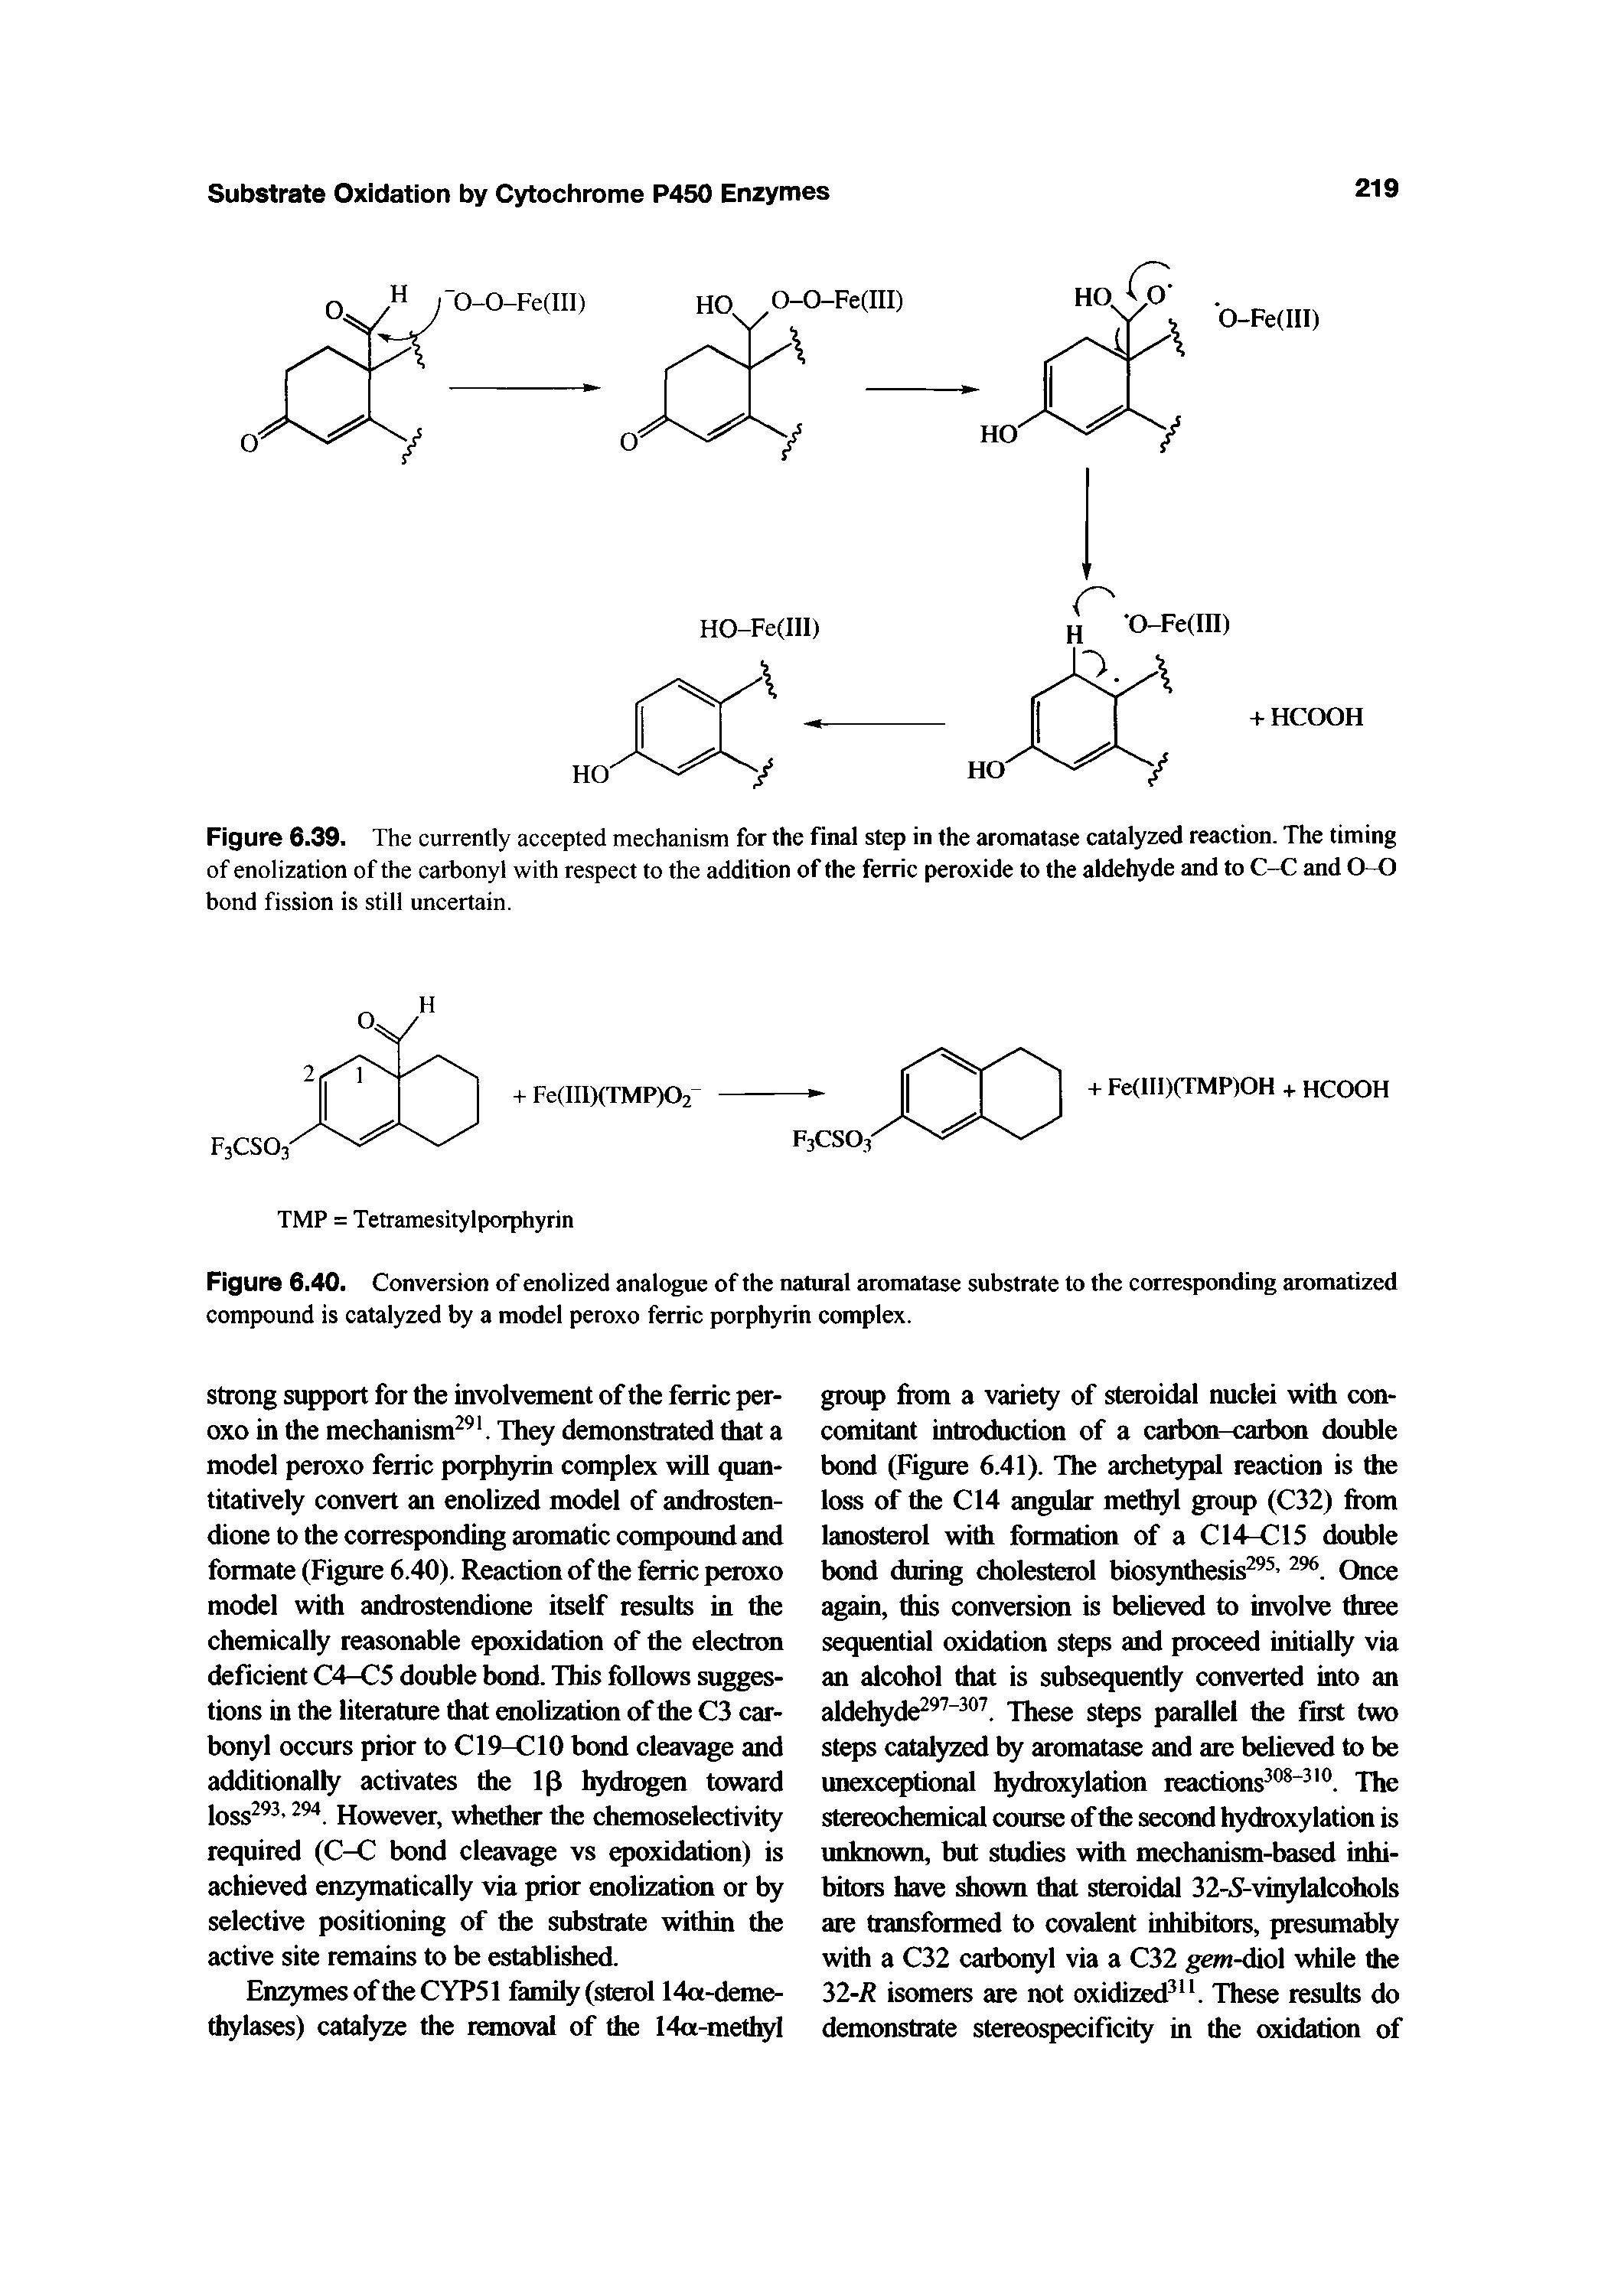 Figure 6.39. The currently accepted mechanism for the final step in the aromatase catalyzed reaction. The timing of enolization of the carbonyl with respect to the addition of the ferric peroxide to the aldehyde and to C-C and 0-0 bond fission is still uncertain.